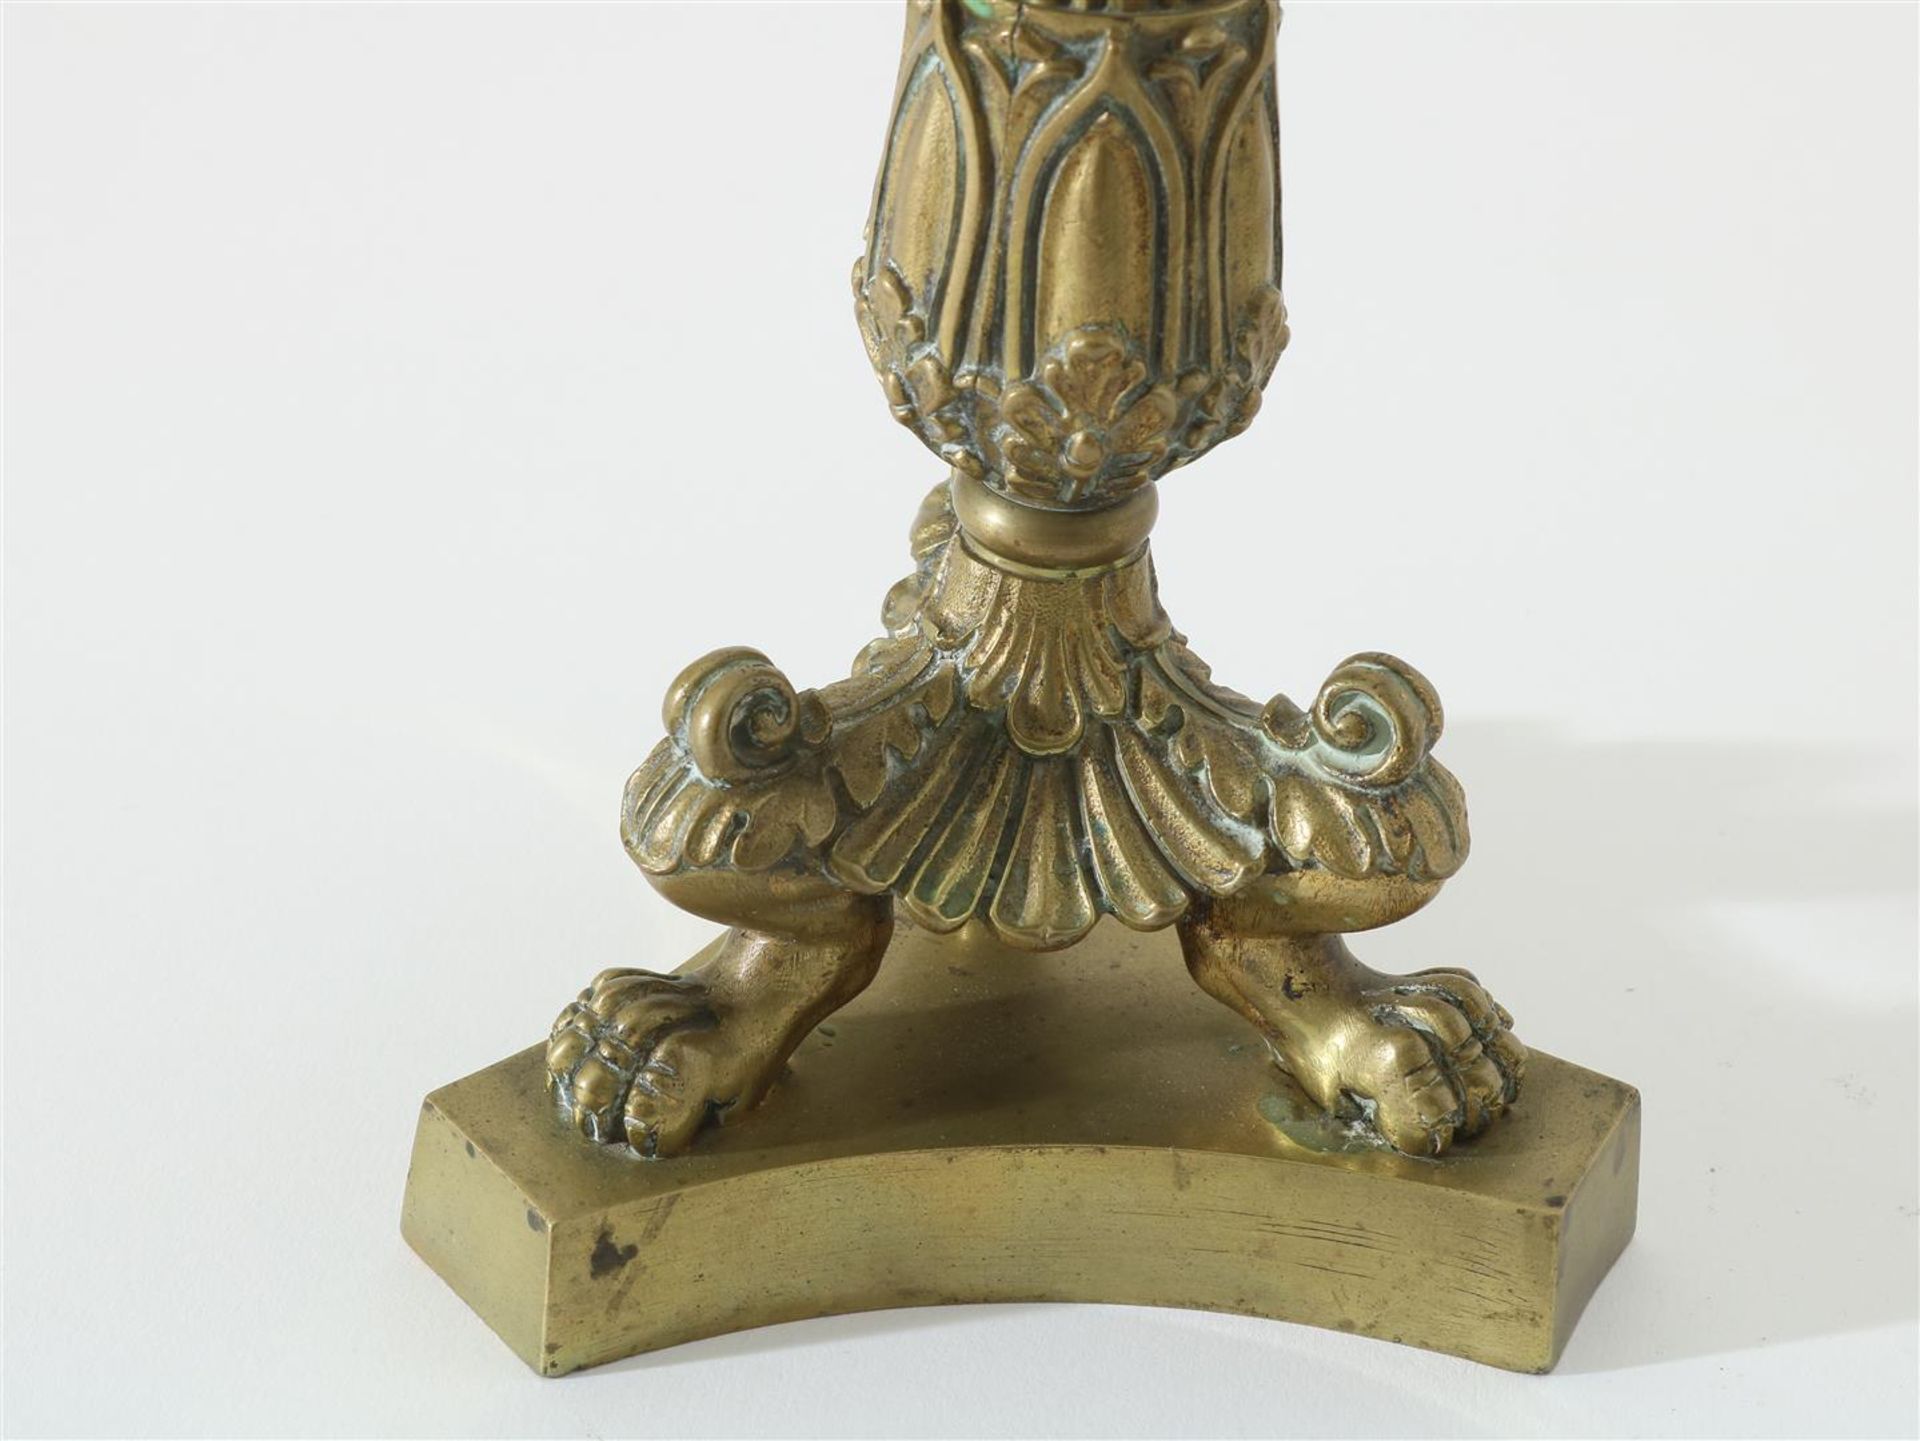 Two brass candlesticks on claw feet, 19th century, height 29 cm. - Image 3 of 4